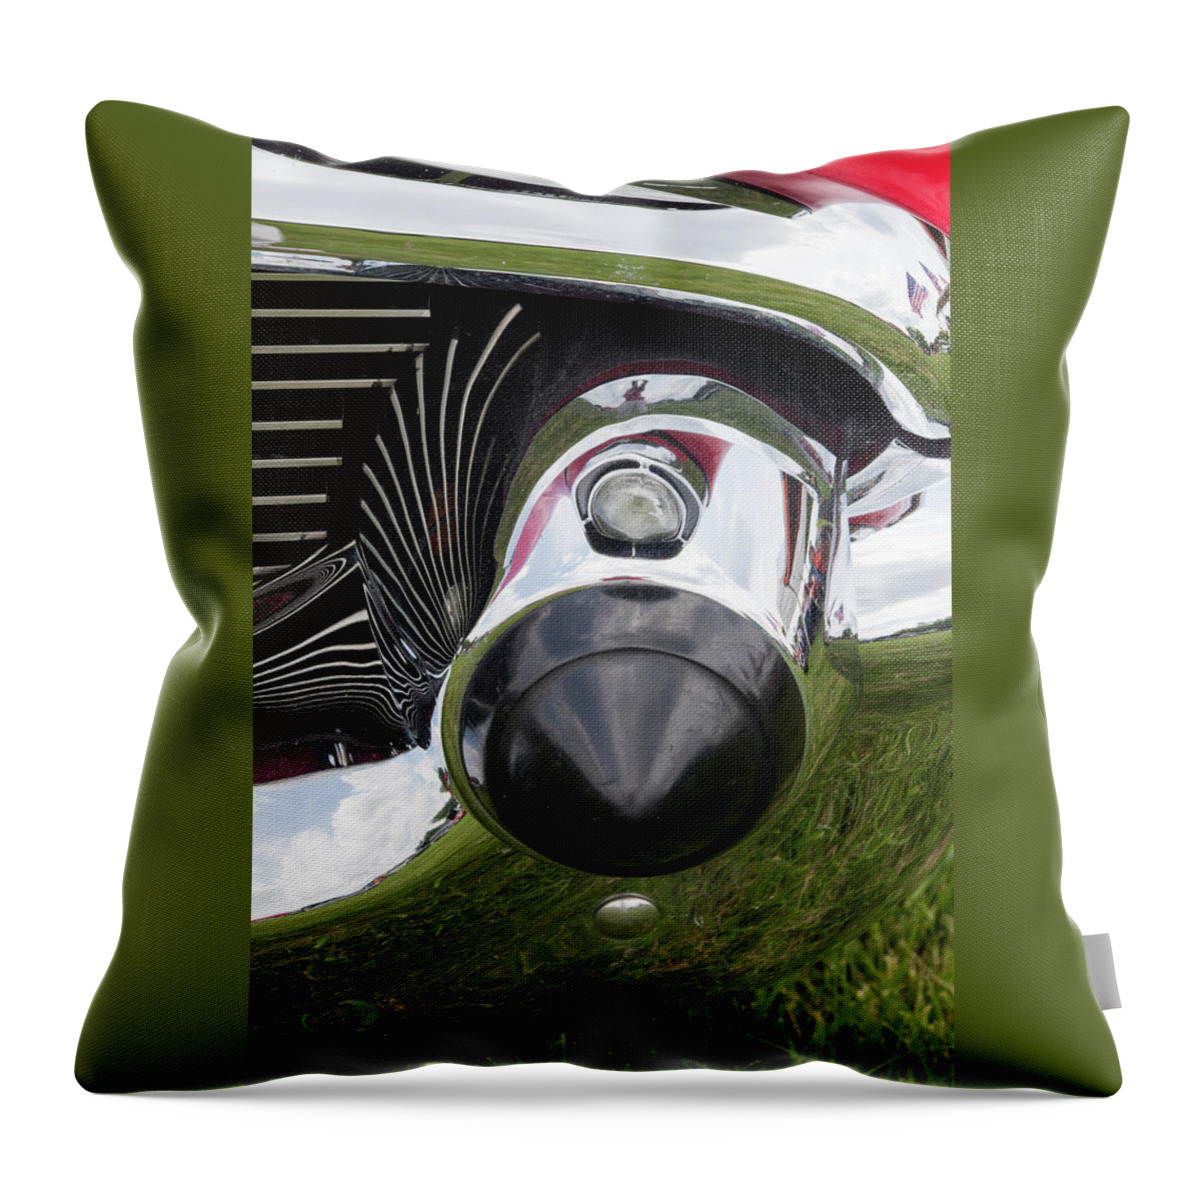 Car Throw Pillow featuring the photograph 57 Chevy Bumper Detail by Ira Marcus